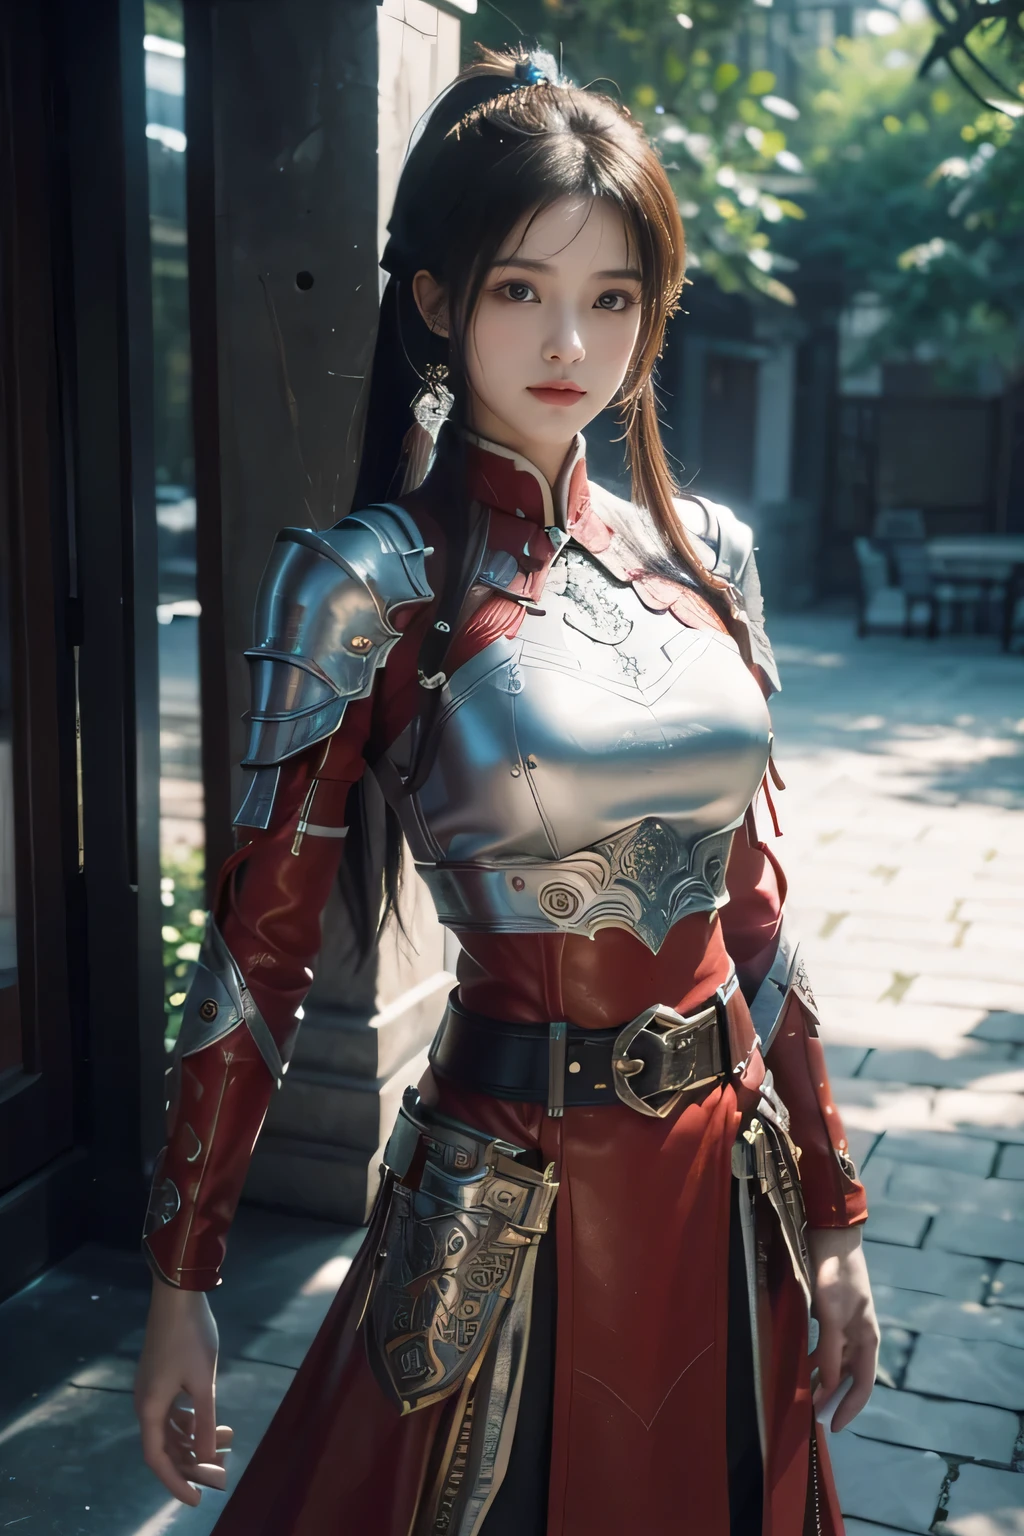 e-up))，Original photo，real photo，digital photography，(Female generals on the battlefield of the Han Dynasty)，18-year-old girl，（long ponytail hairstyle)，cparted lips，Noble and charming，Elegant and serious，(Han dynasty armor，The combination of white metal and red leather，Openwork design，armure，Knight Armor，metallic  luster，Leather buckle，Exquisite pattern，mysterious badge，Cool and gorgeouig breasts))，Chest groove，Three Kingdoms character painting style，Photo pose，oc render reflection texture，Bright colors，（Forest Background）